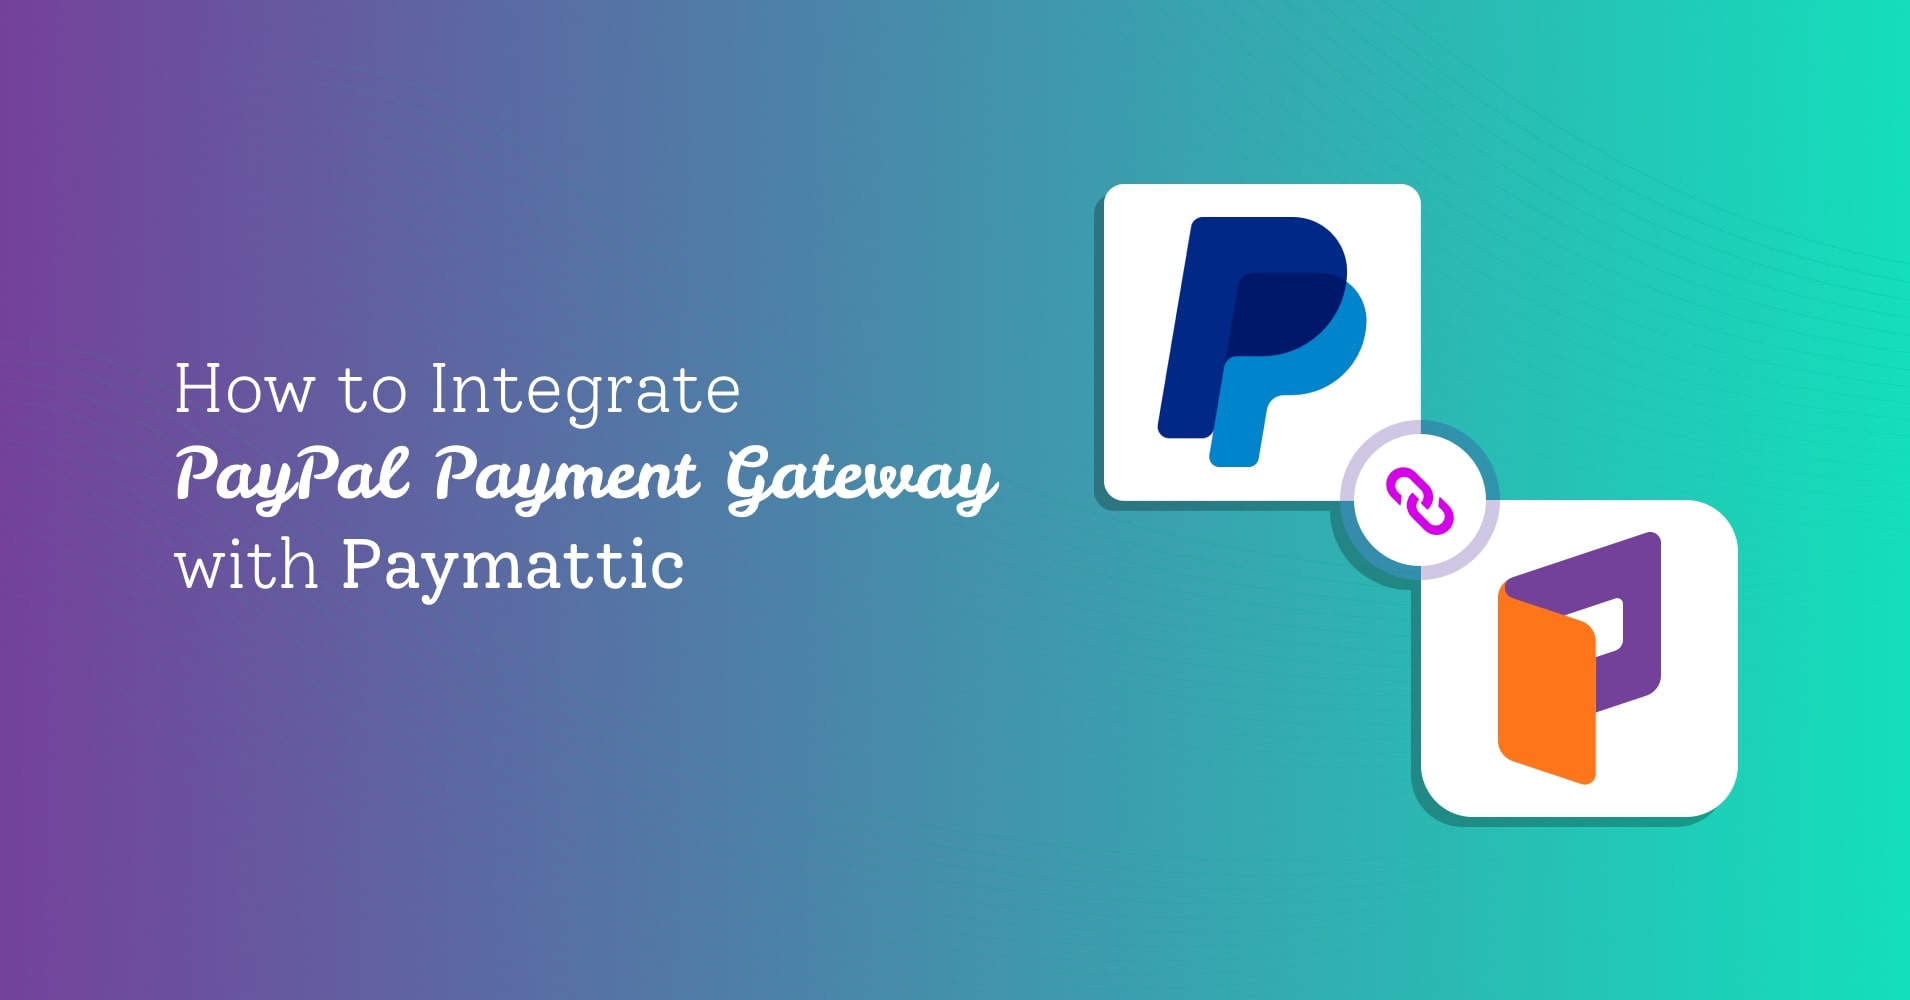 How to Integrate PayPal Payment Gateway with Paymattic